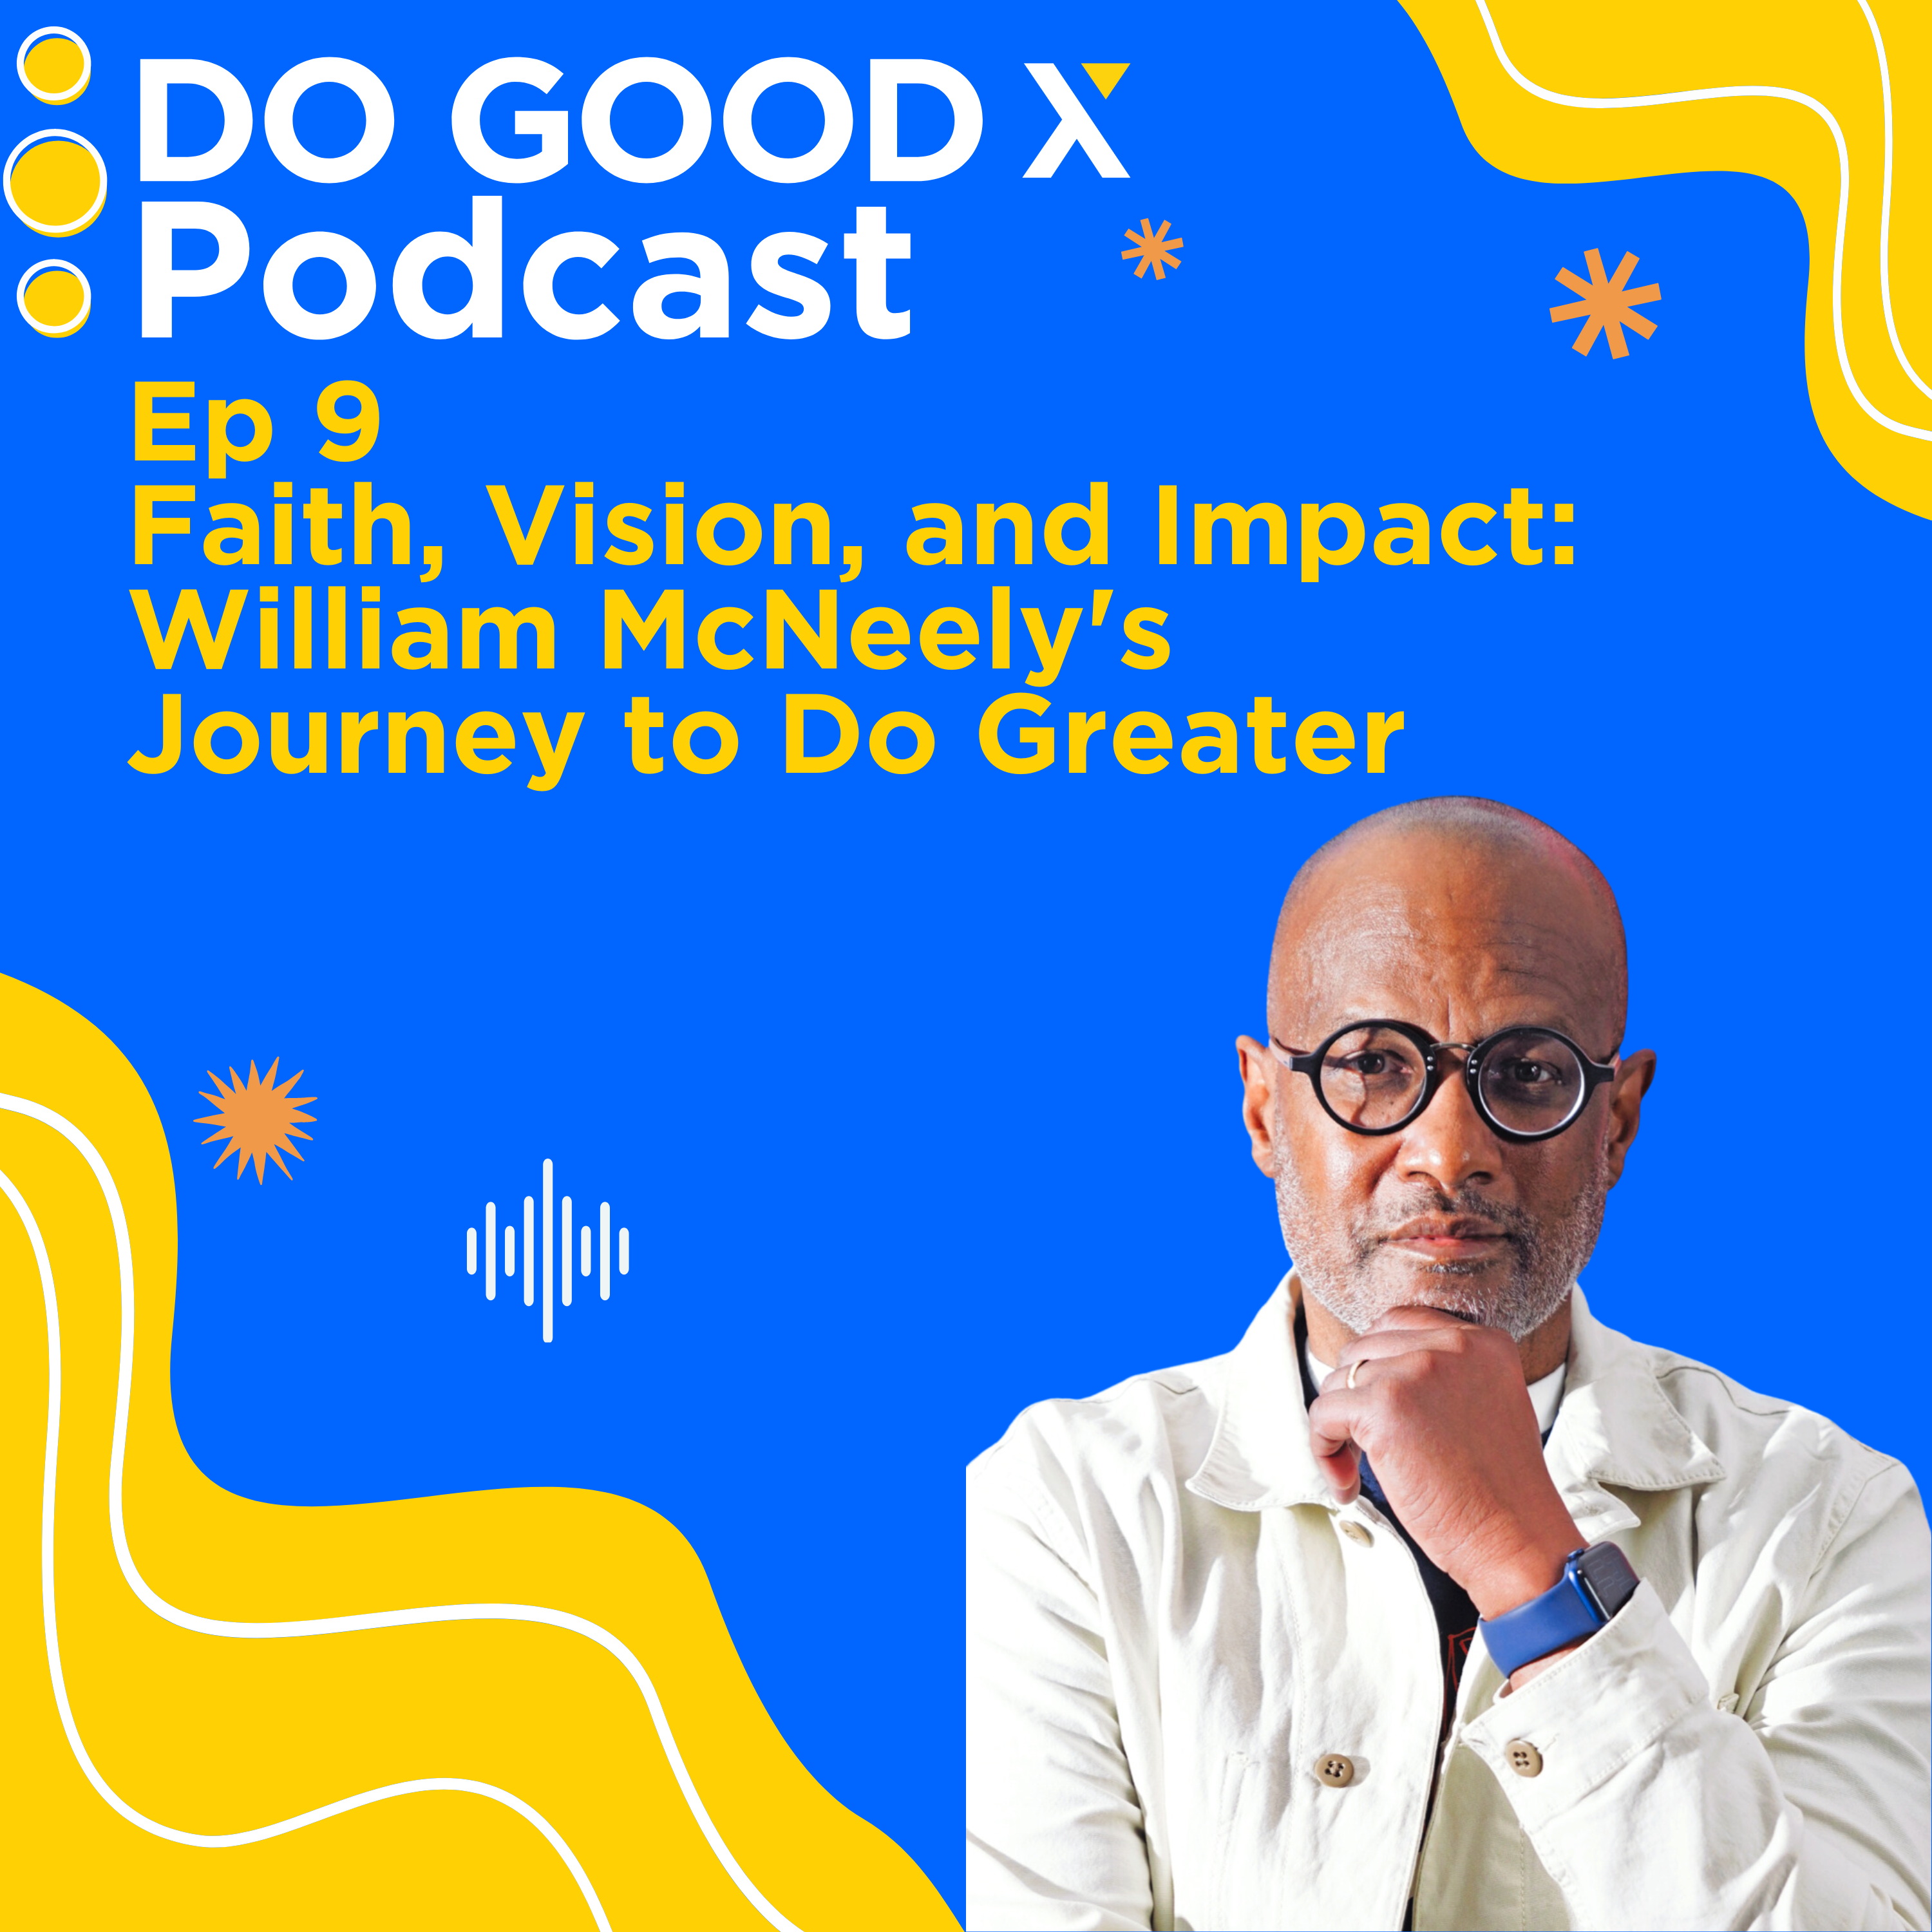 Ep. 9 Faith, Vision, and Impact: William McNeely’s Journey to Do Greater